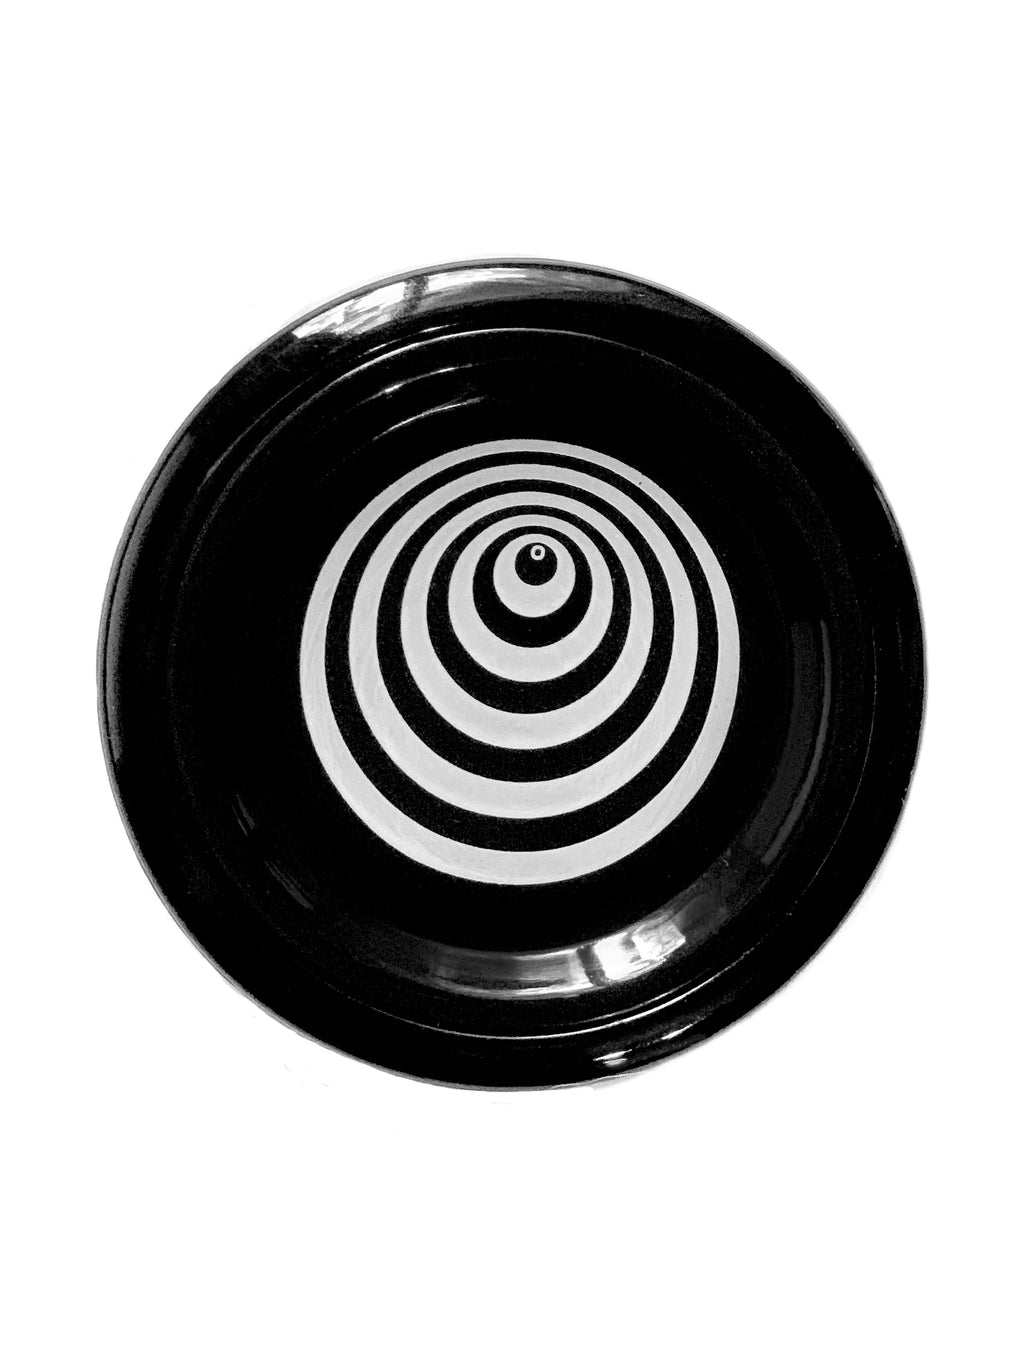 A black plastic yo-yo with a wormhole optical illusion in white in the middle.